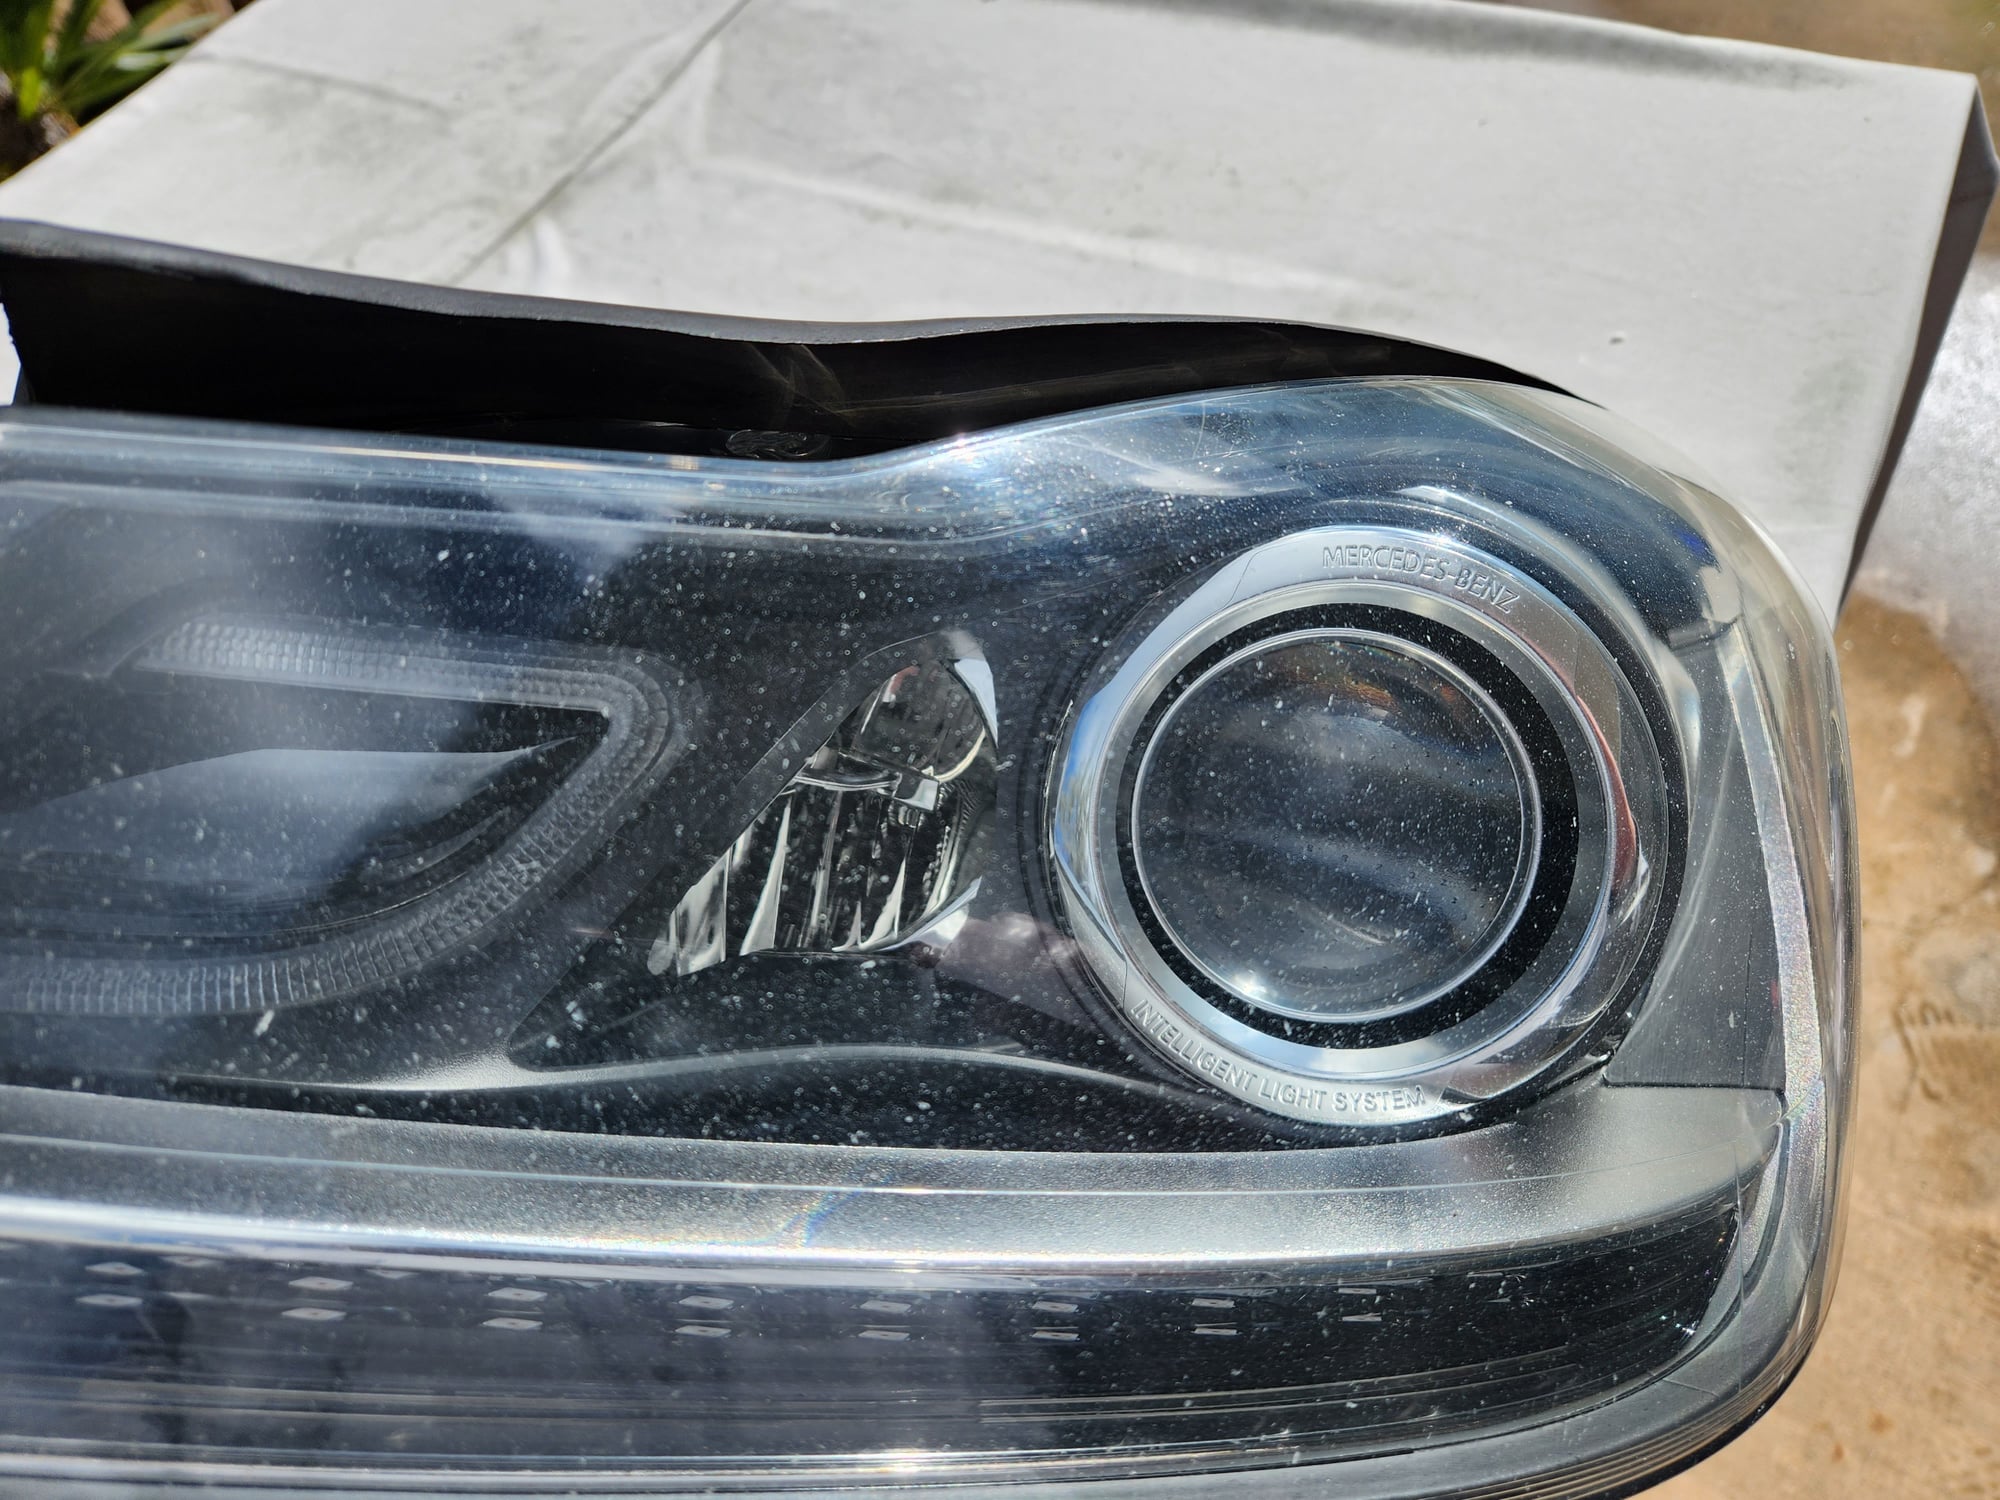 Lights - W204 Facelift HID Headlights - Used - 2011 to 2014 Mercedes-Benz C-Class - San Diego, CA 91910, United States